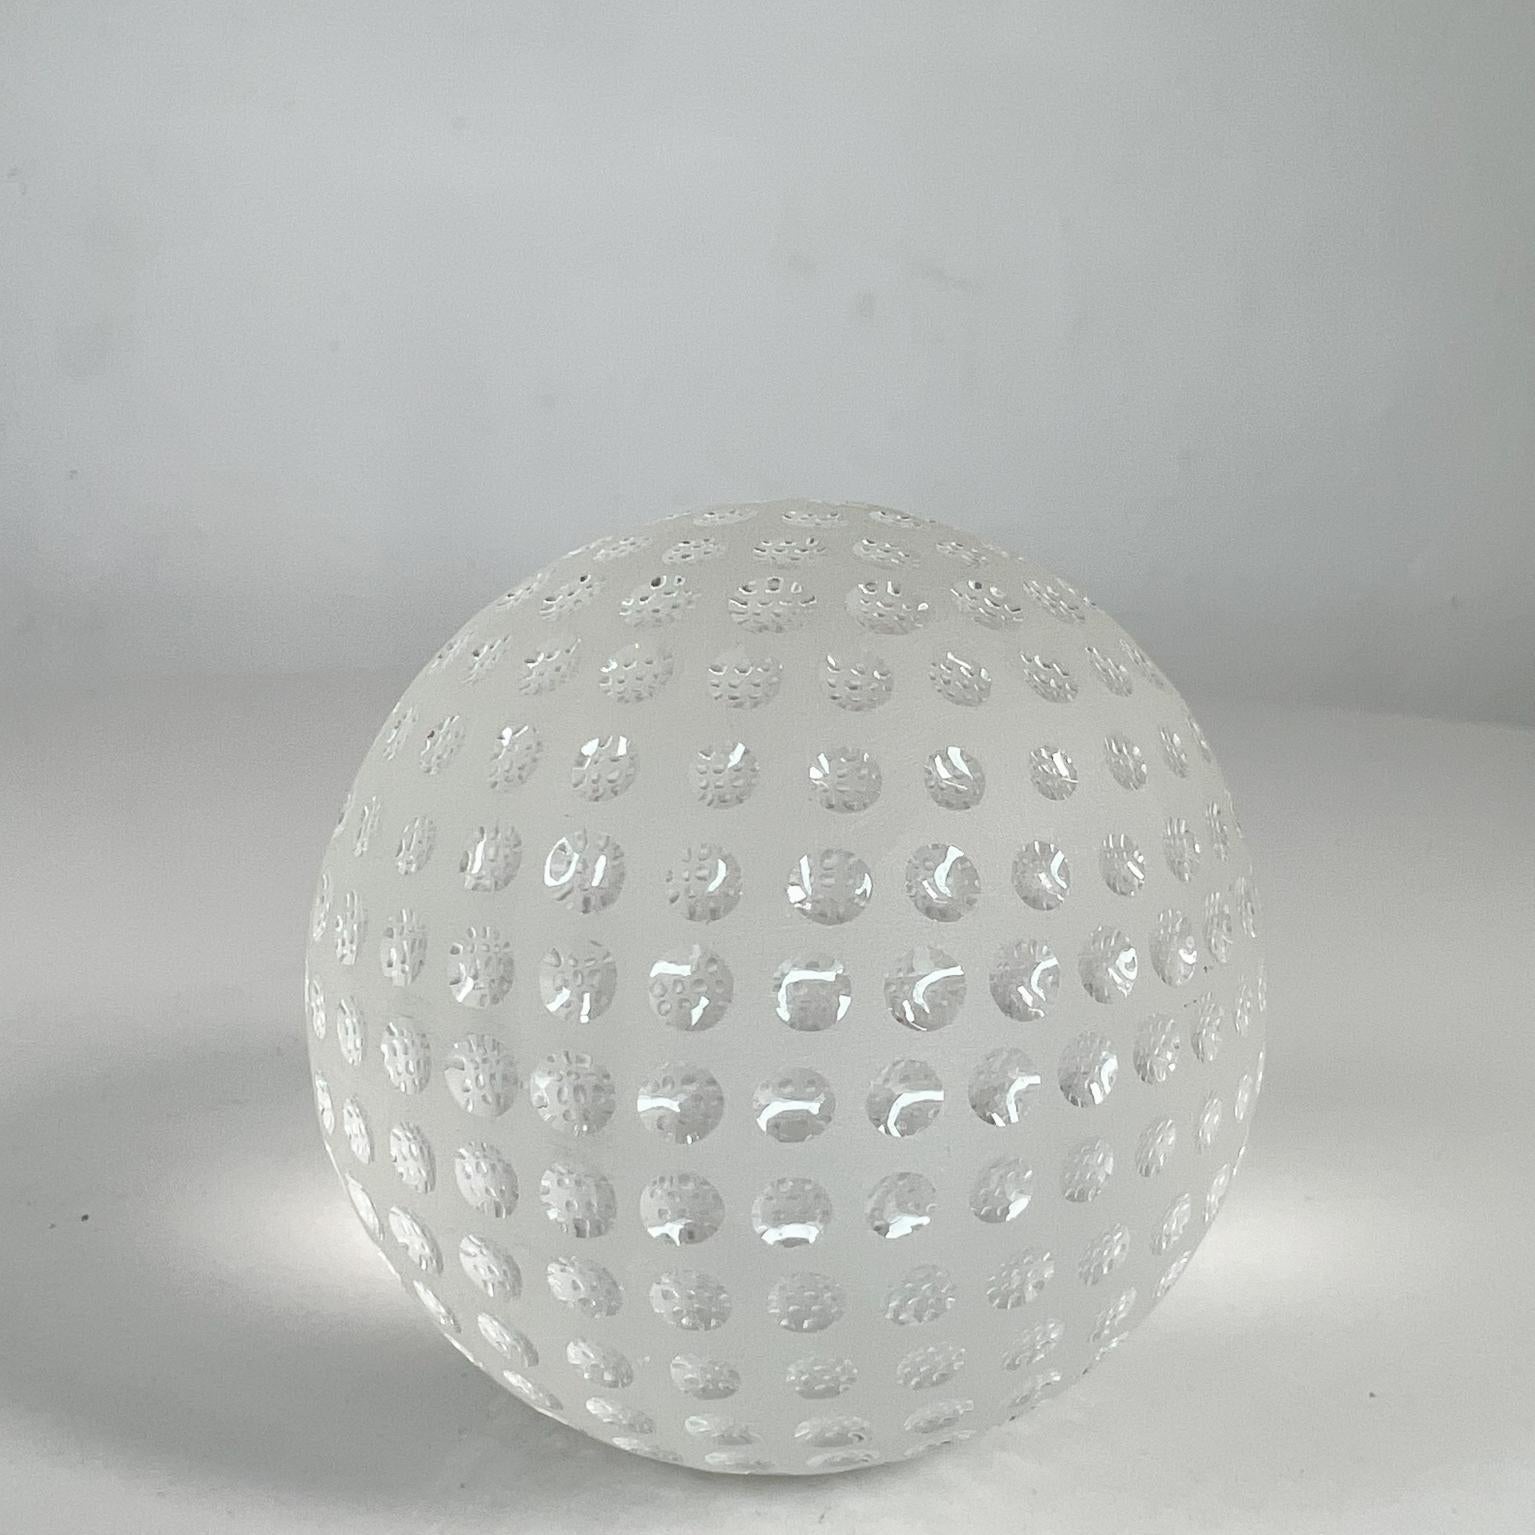 Contemporary Tiffany & Co Art Glass Crystal Frosted Golf Ball Paperweight Sculpture